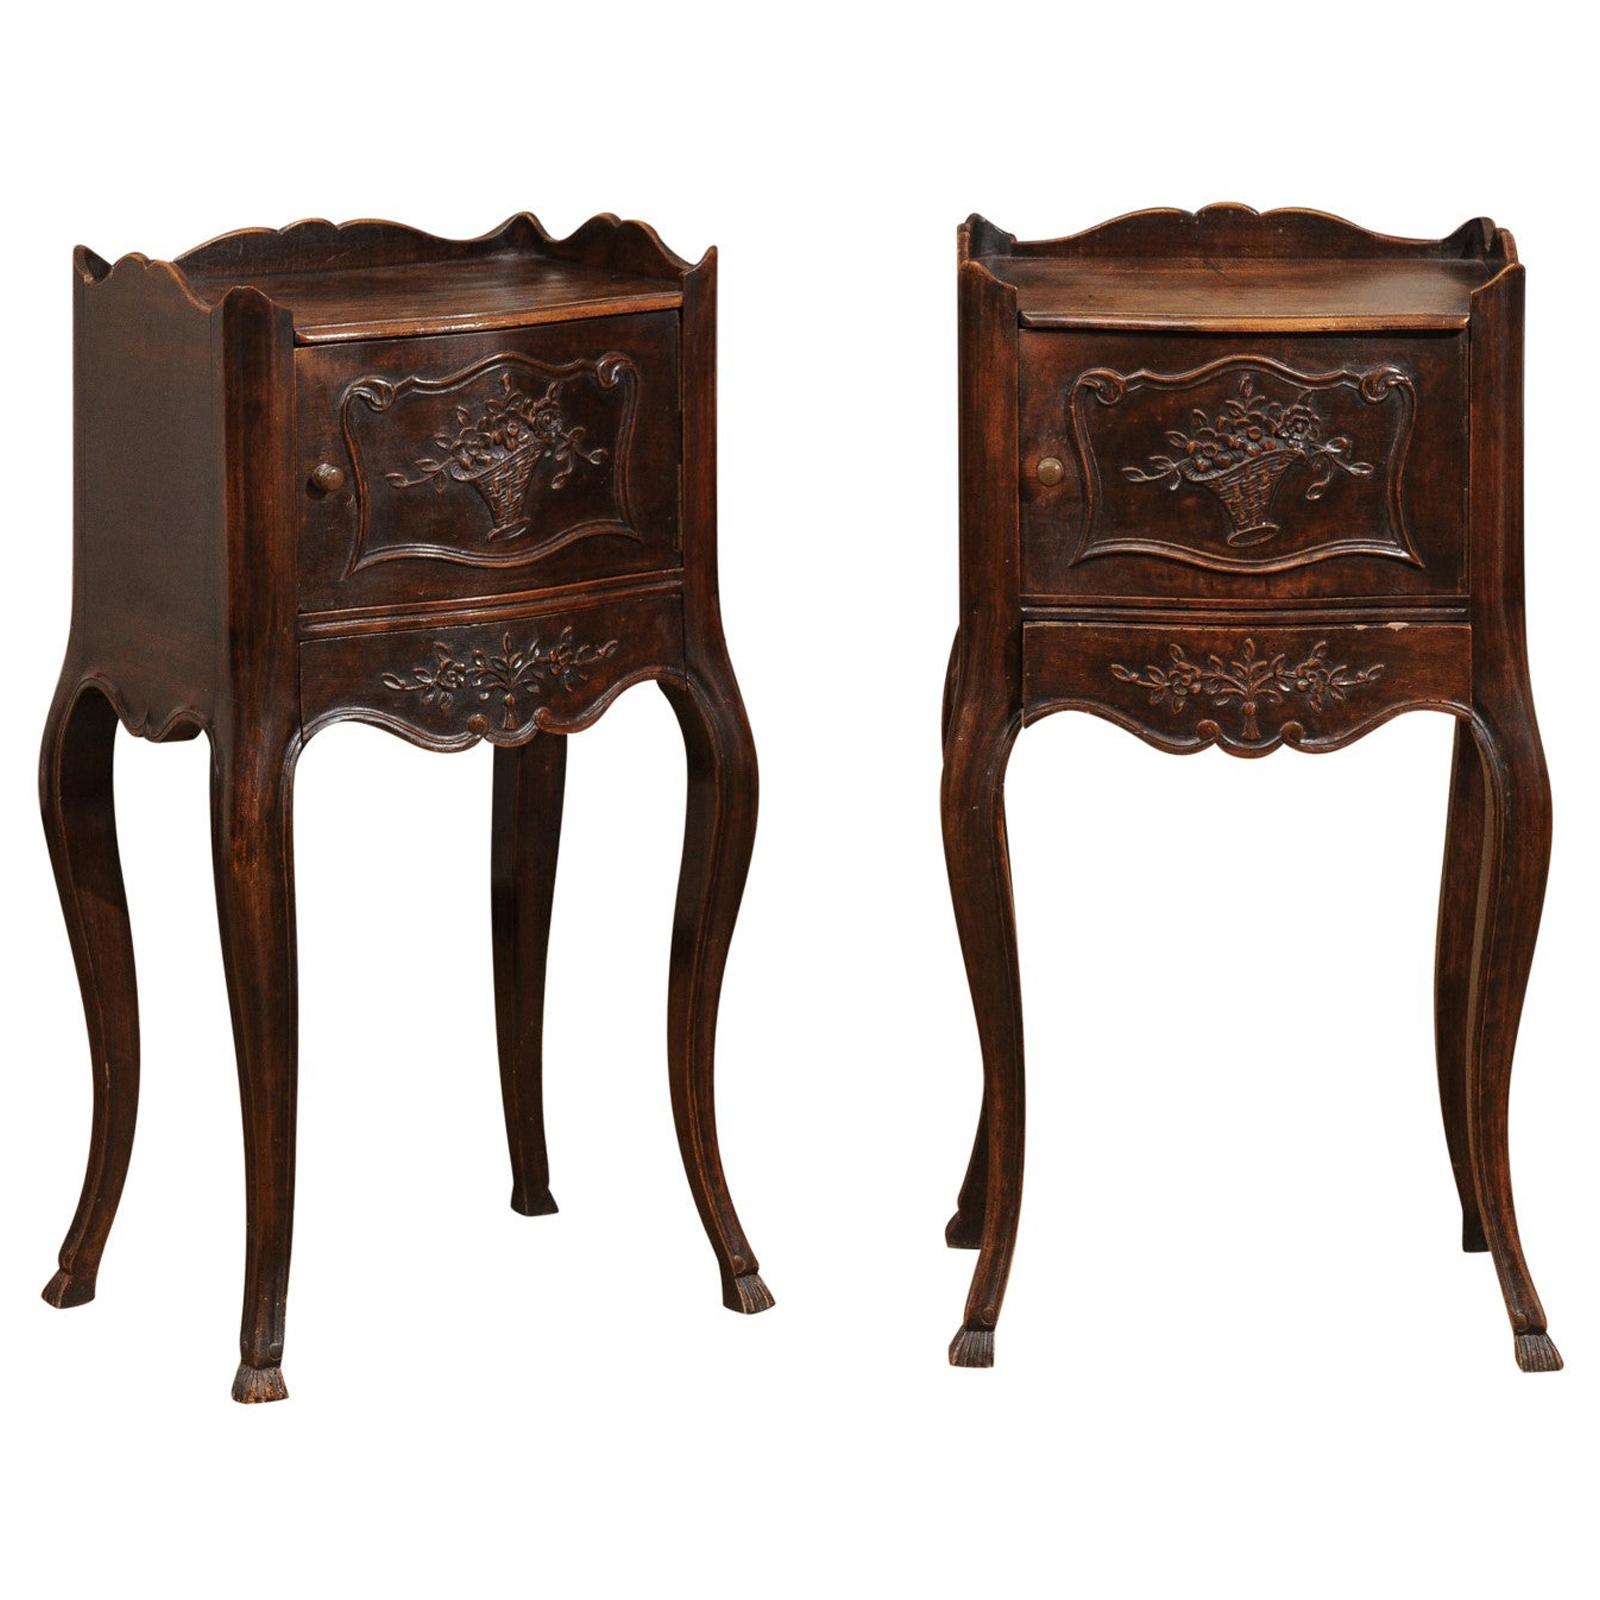 Pair of 19th Century French Carved Walnut Bedside Tables with Doors and Drawers